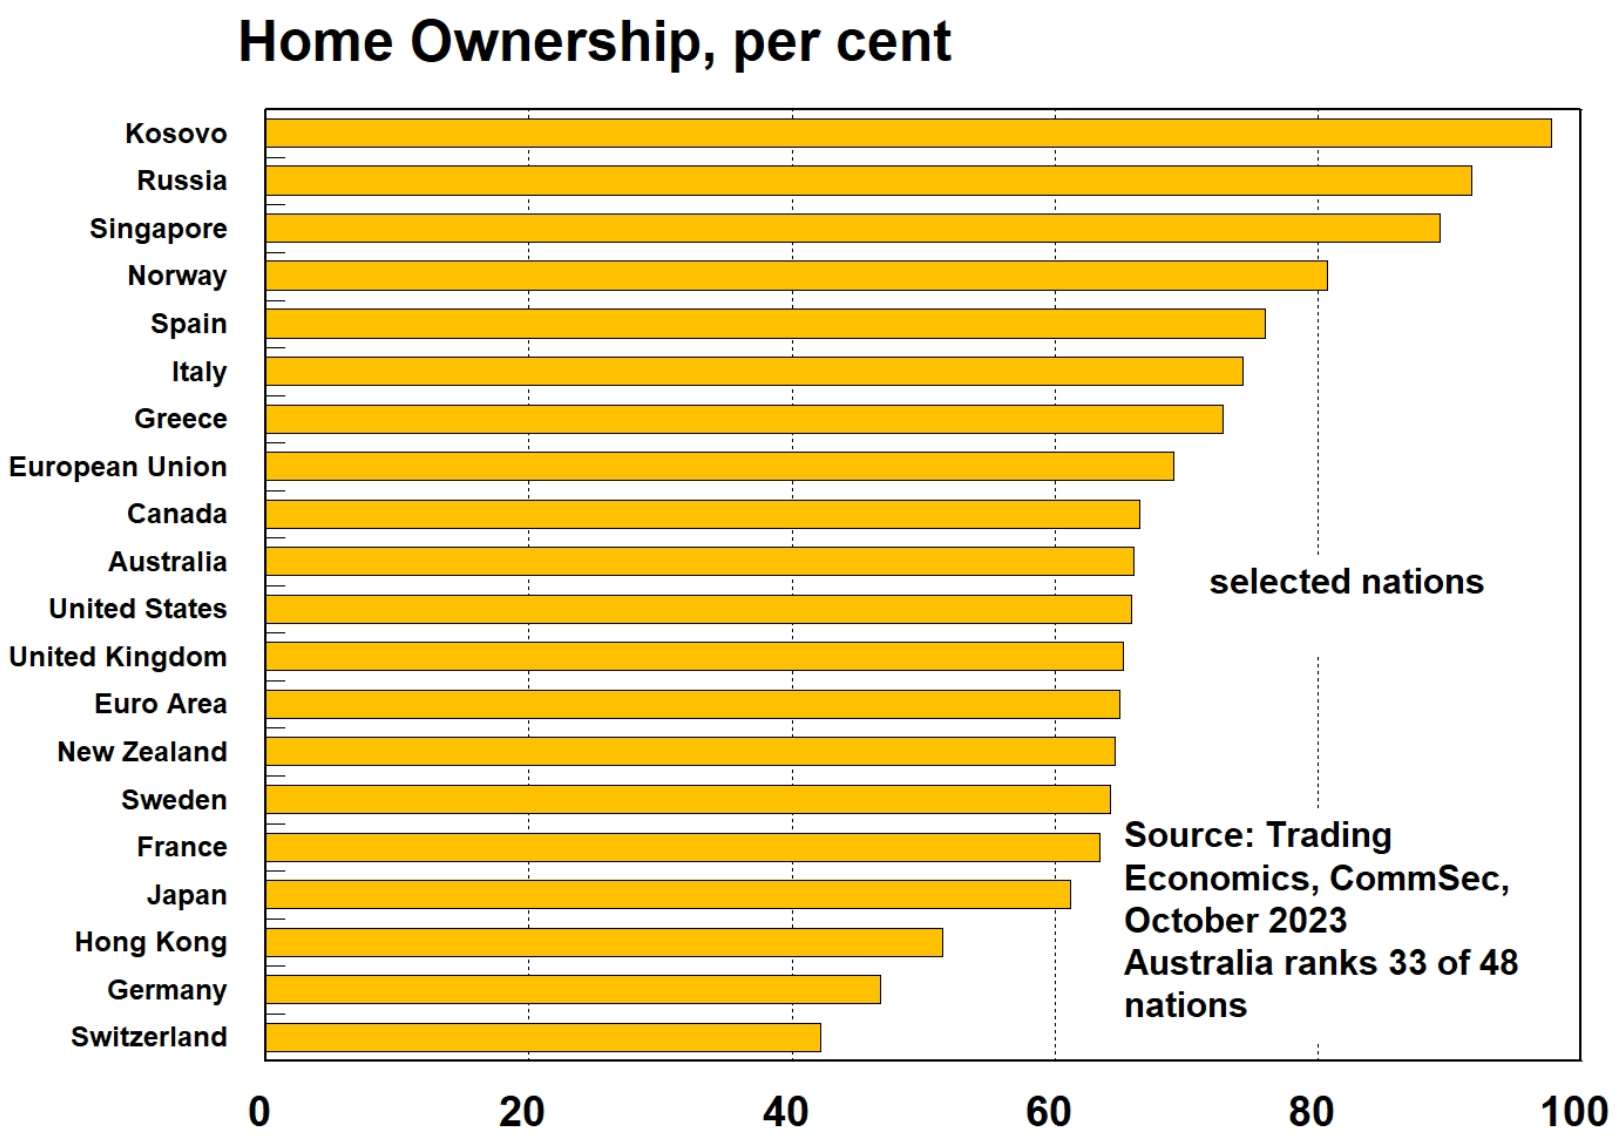 Home ownership rates